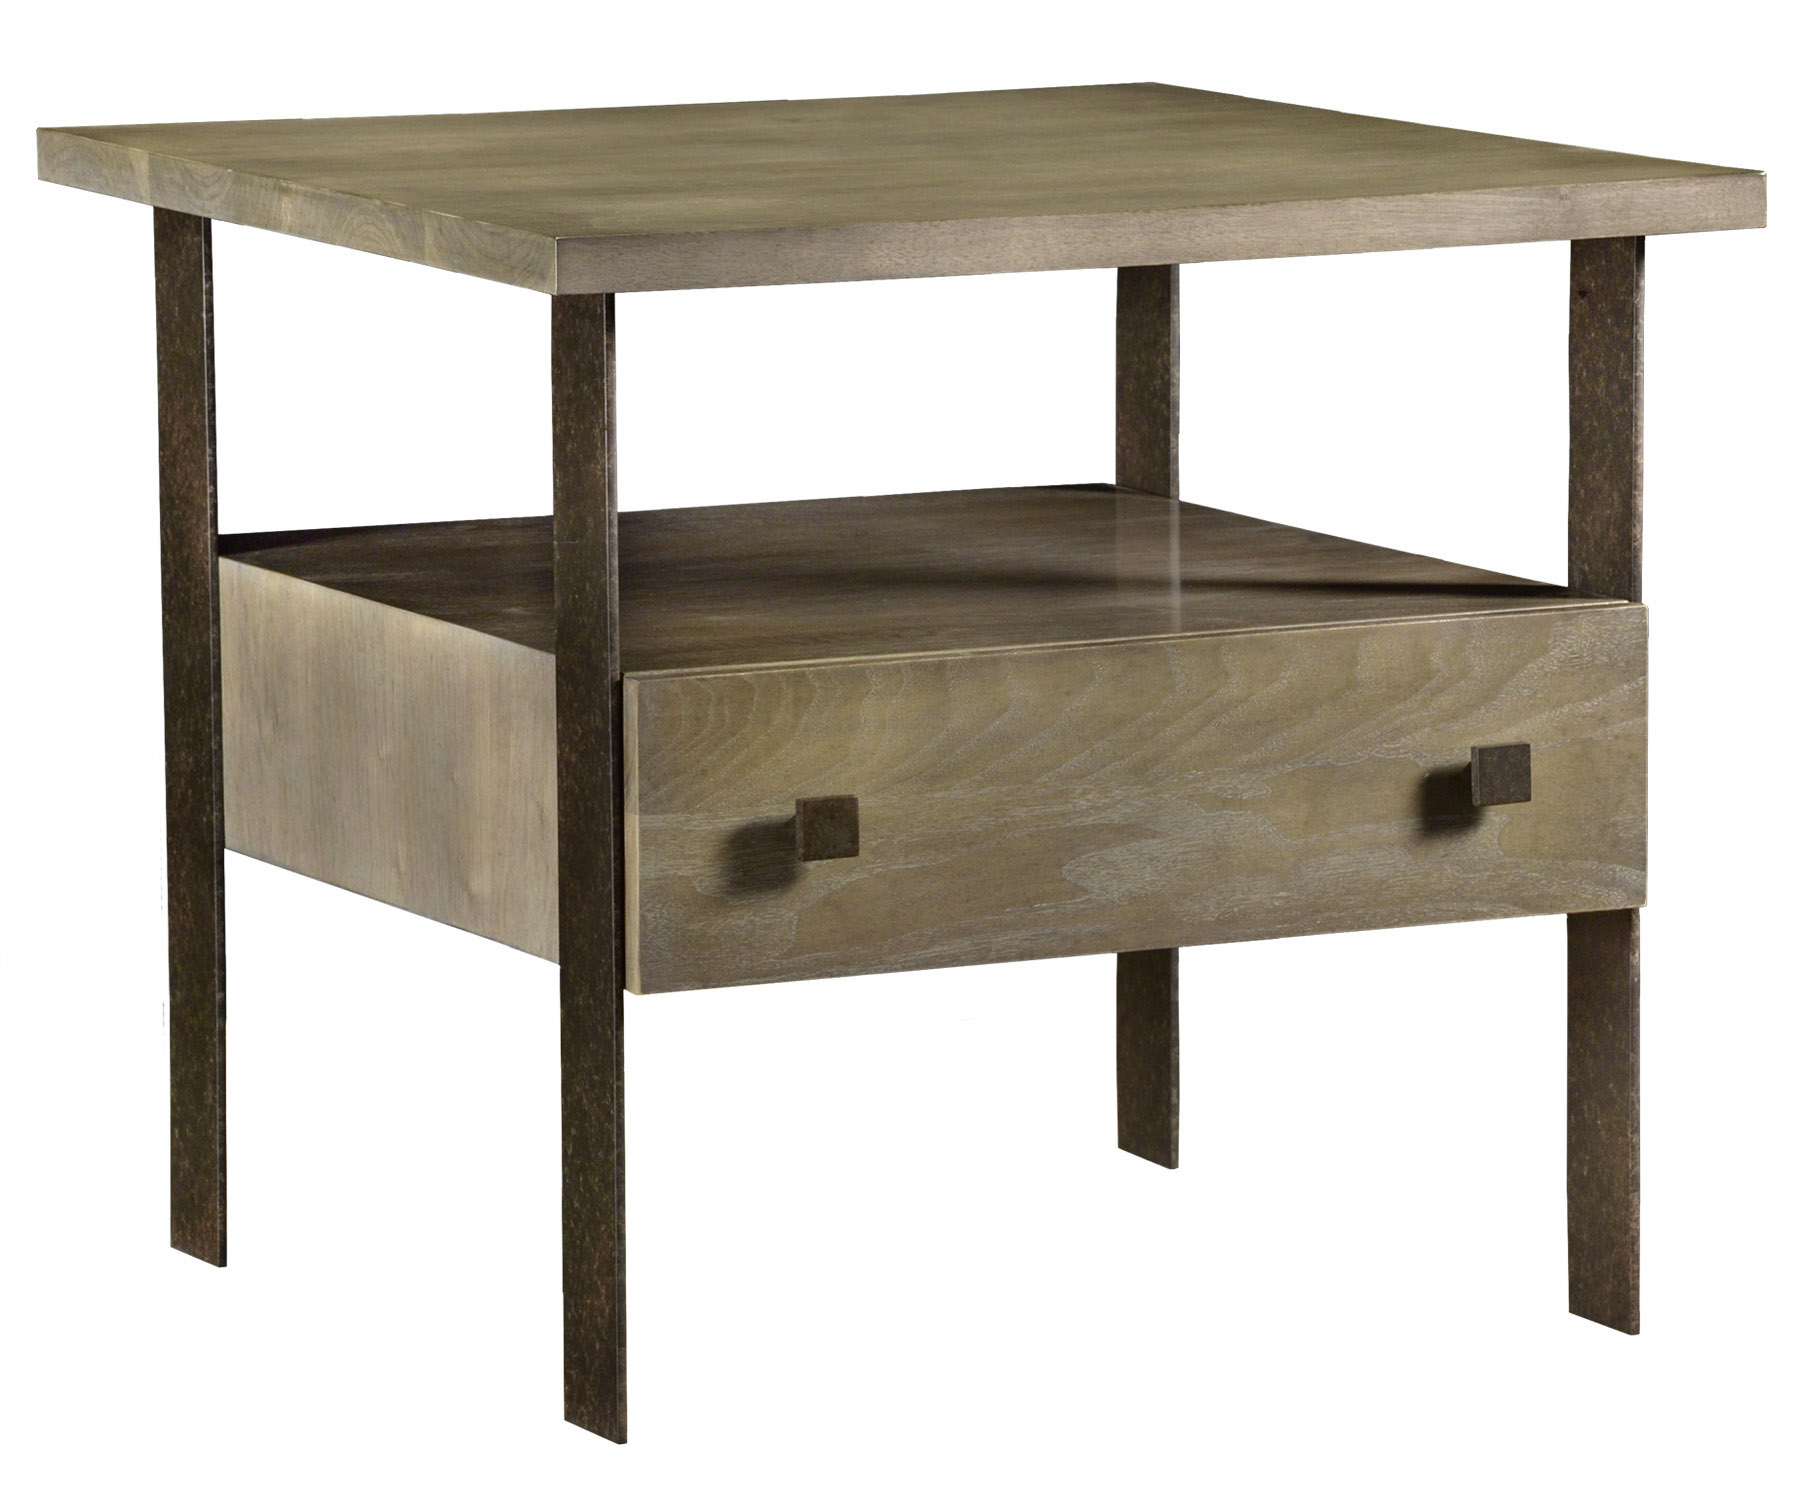 Leopold contemporary transitional industrial rustic side or end table with shelf, drawers, and metal legs by Woodland furniture in Idaho Falls